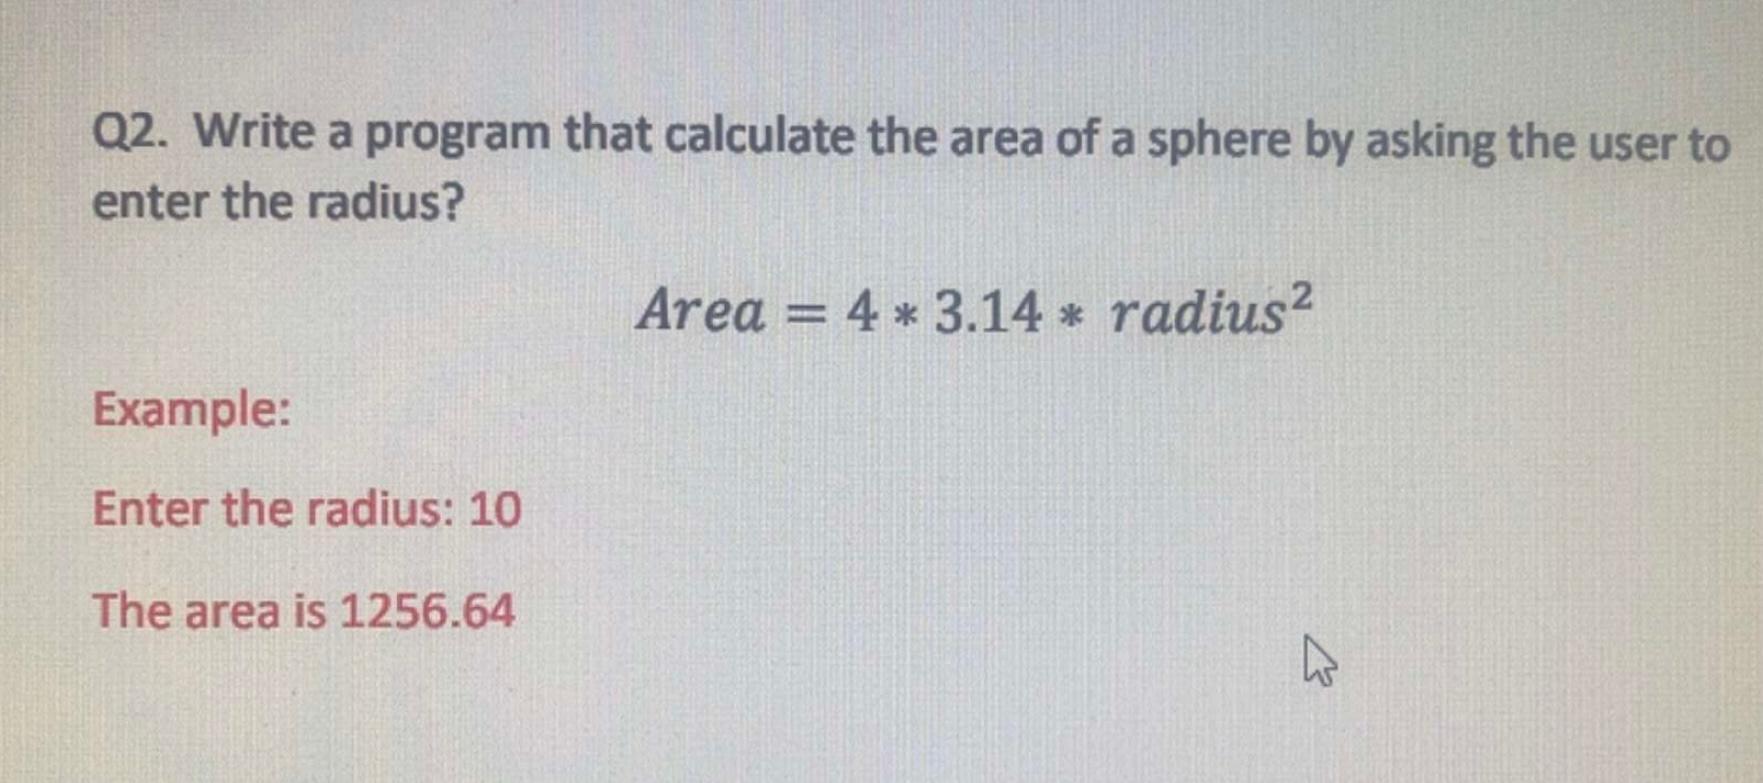 Q2. Write a program that calculate the area of a sphere by asking the user to enter the radius? Example: